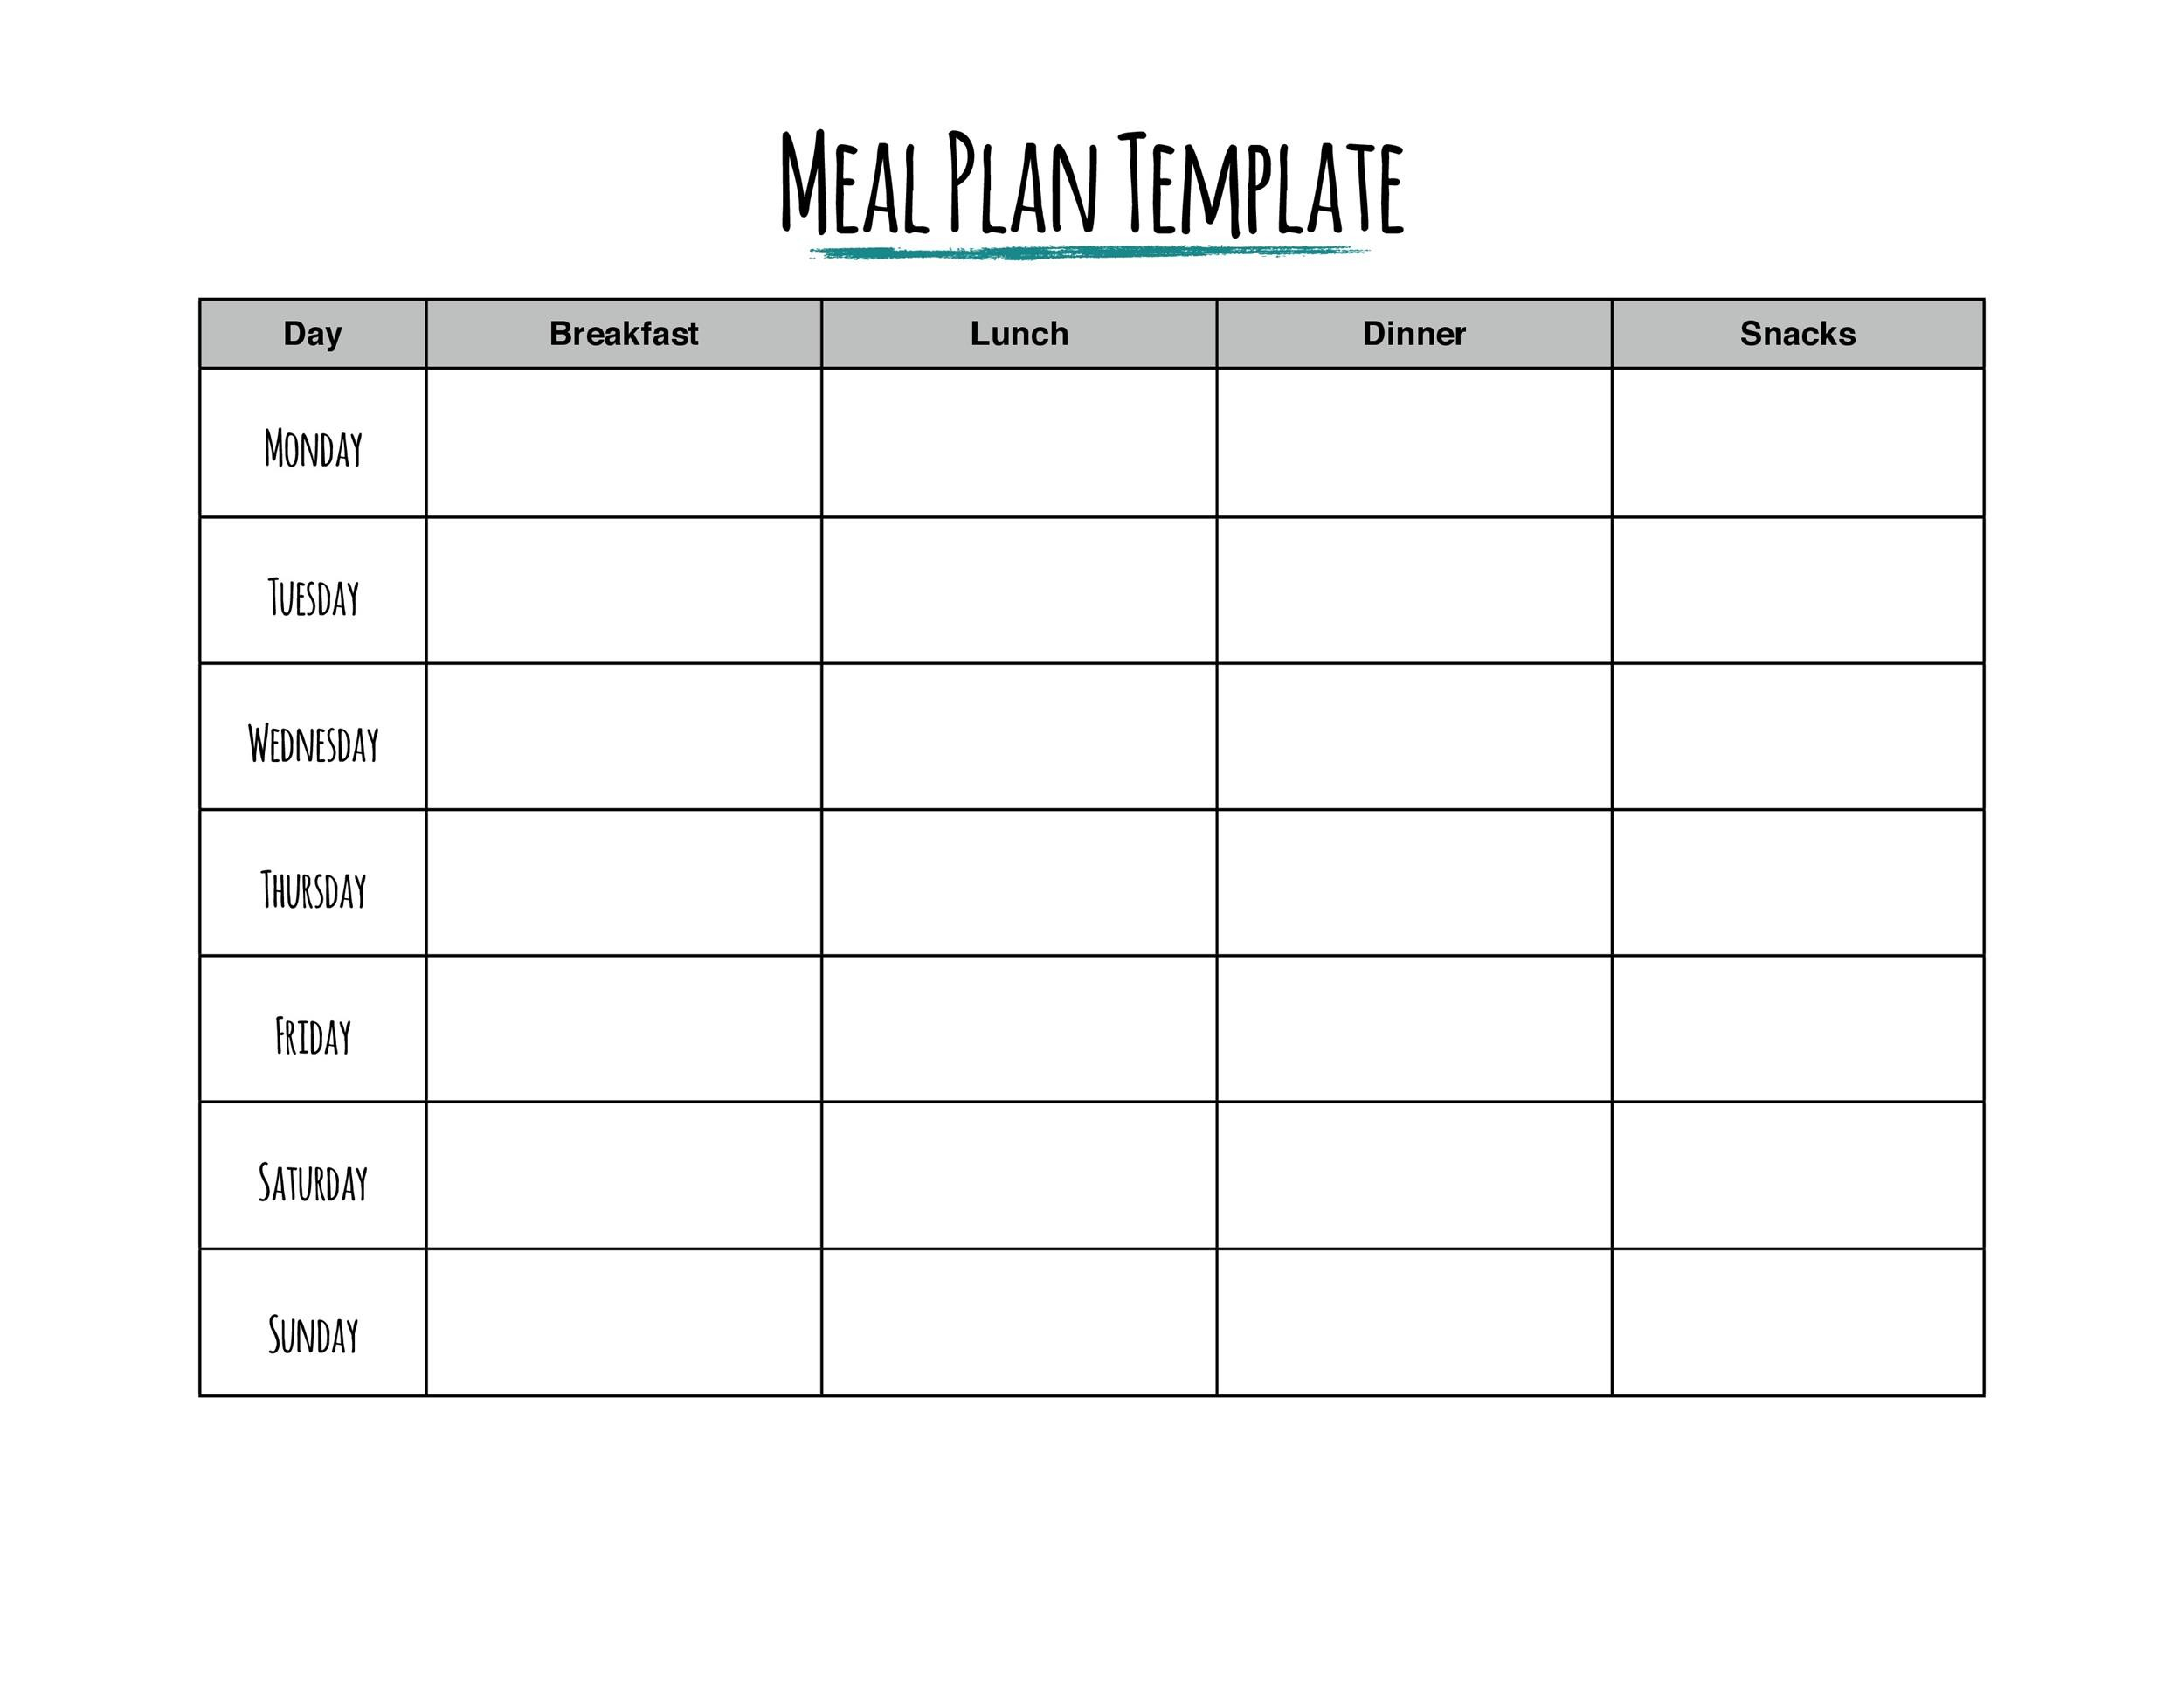 40 Weekly Meal Planning Templates TemplateLab